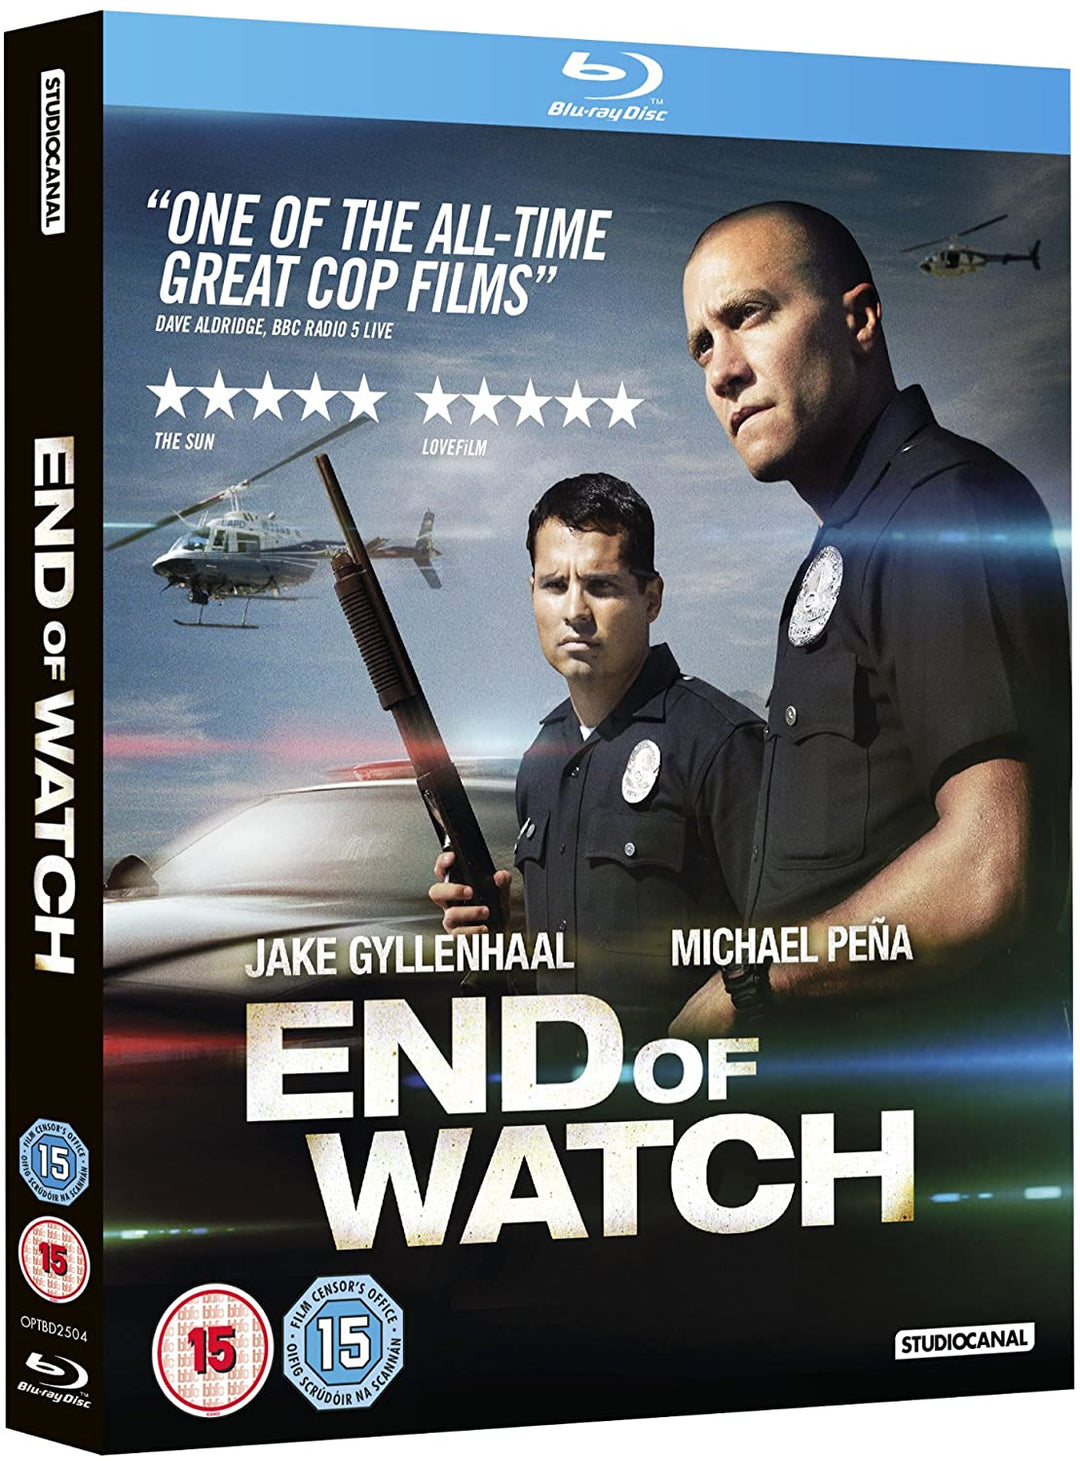 End Of Watch [2012] – Action/Krimi [Blu-ray]